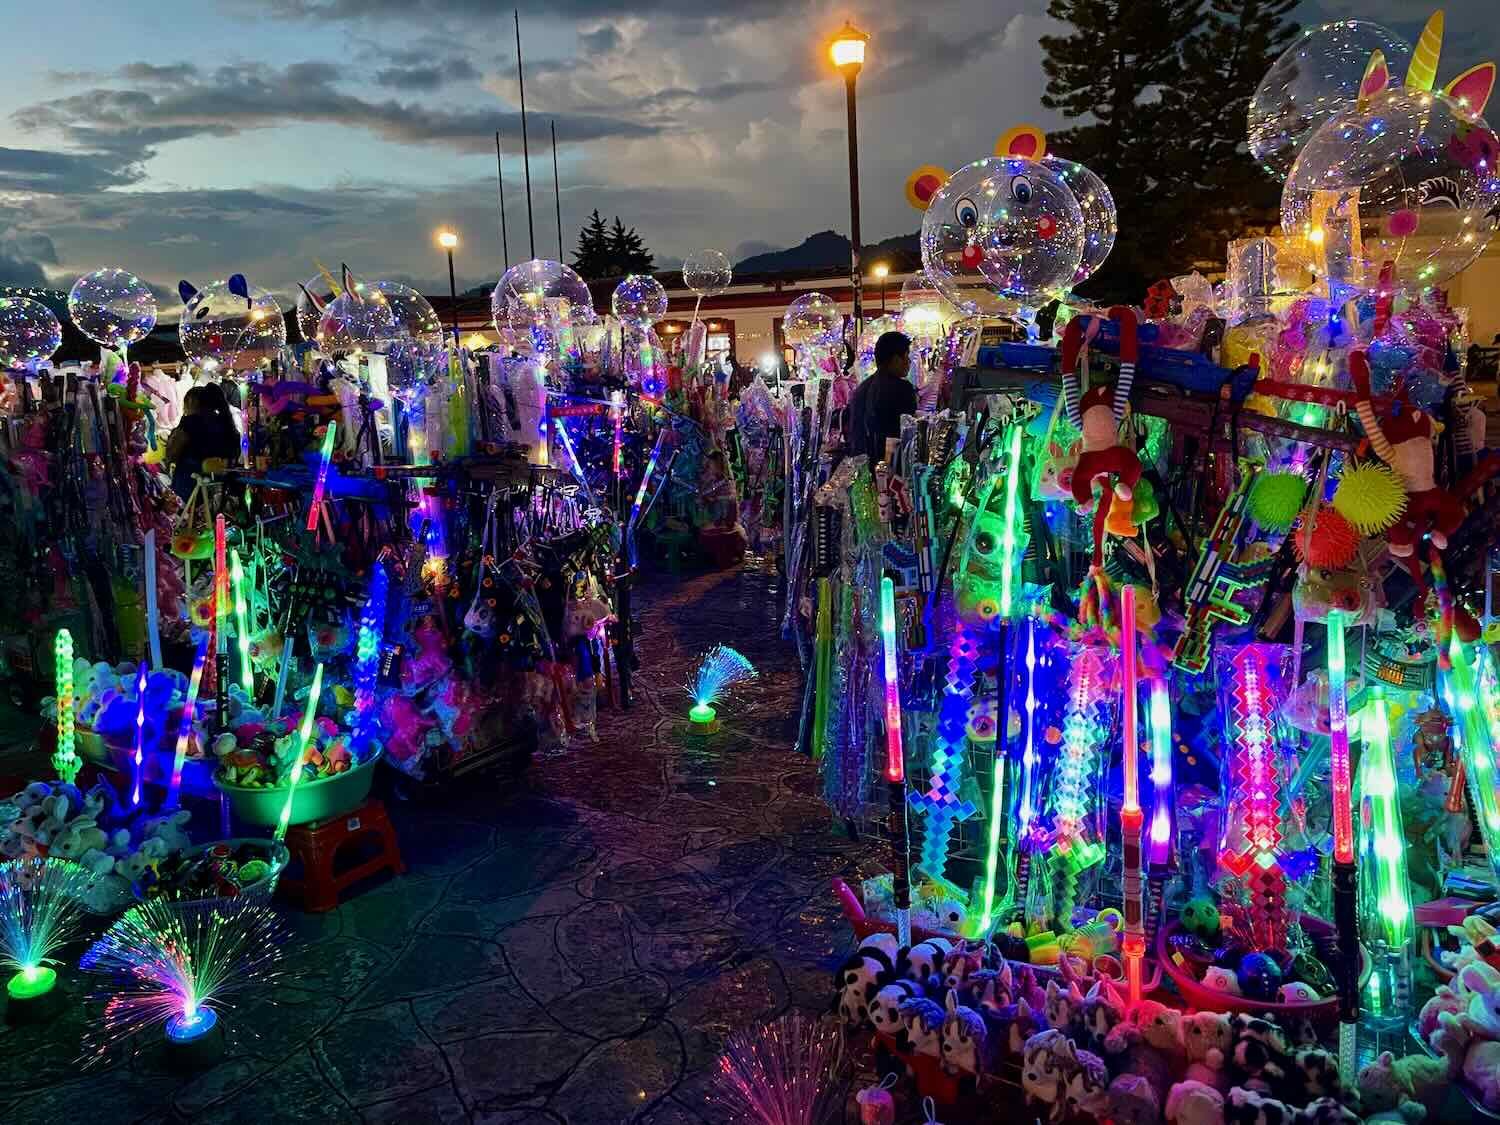 Vendors selling glow-sticks and sparkling toys clustered together on one side